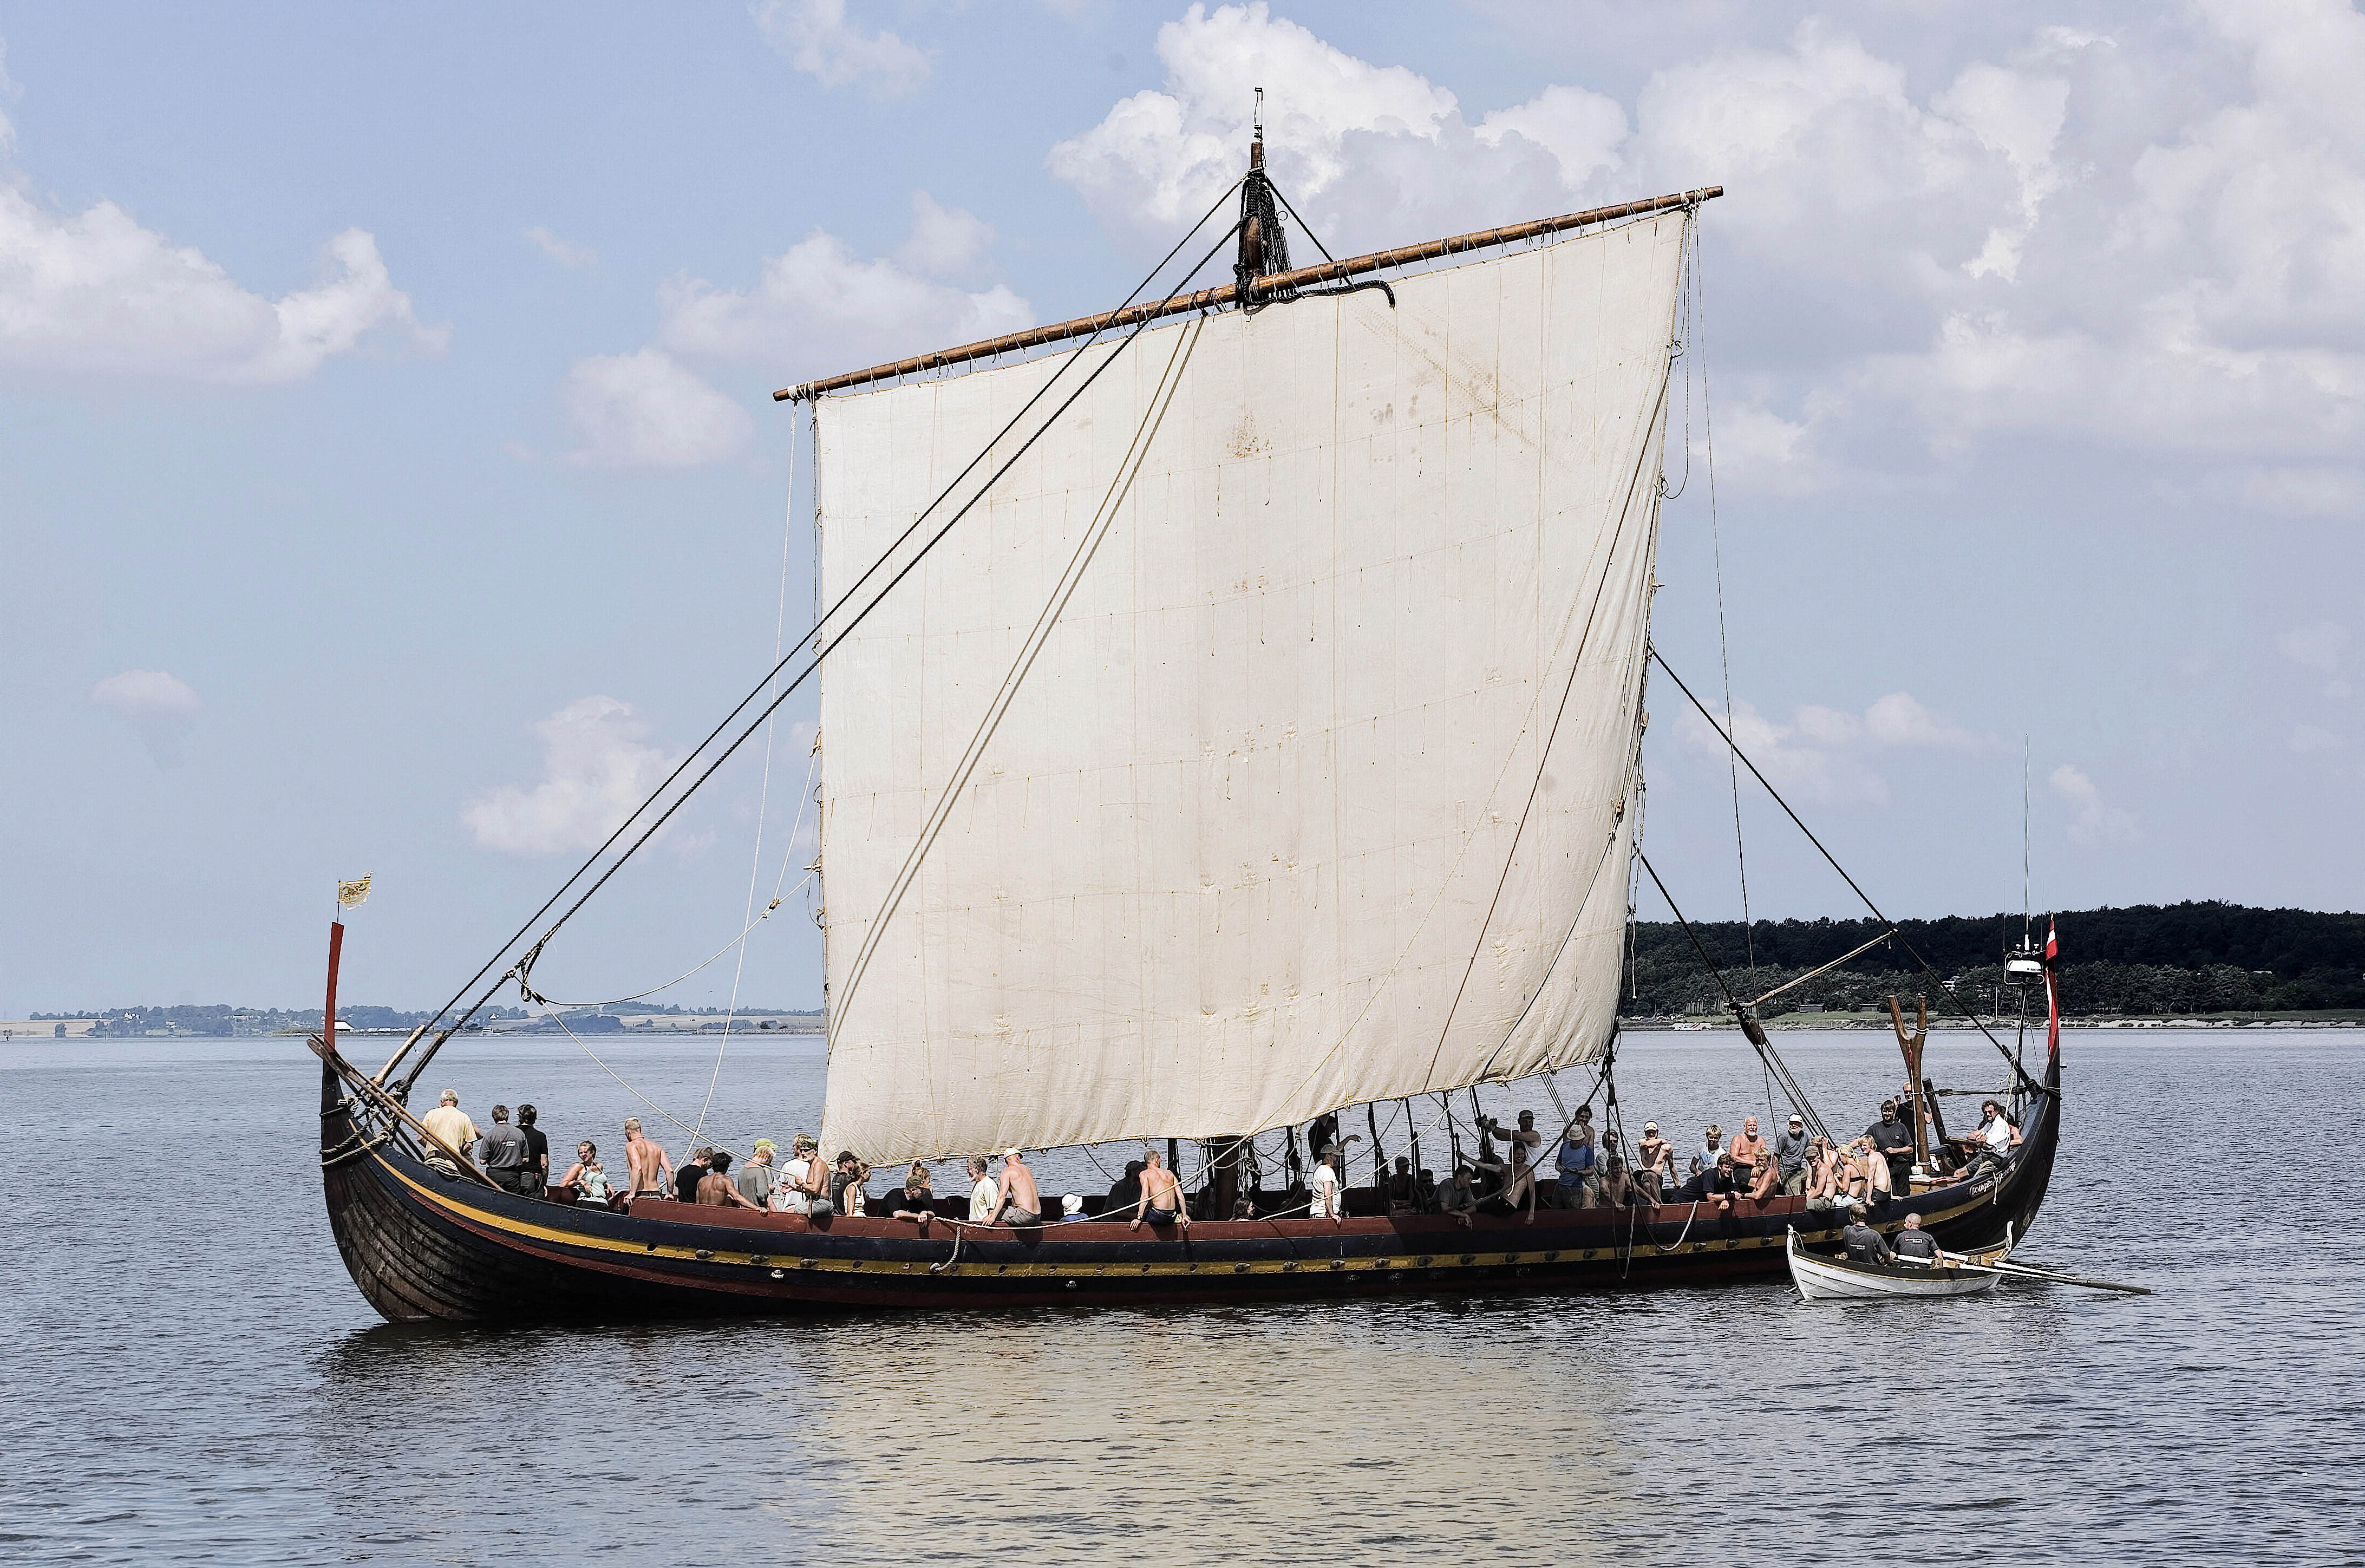 Scientists raid DNA to explore Vikings' genetic roots